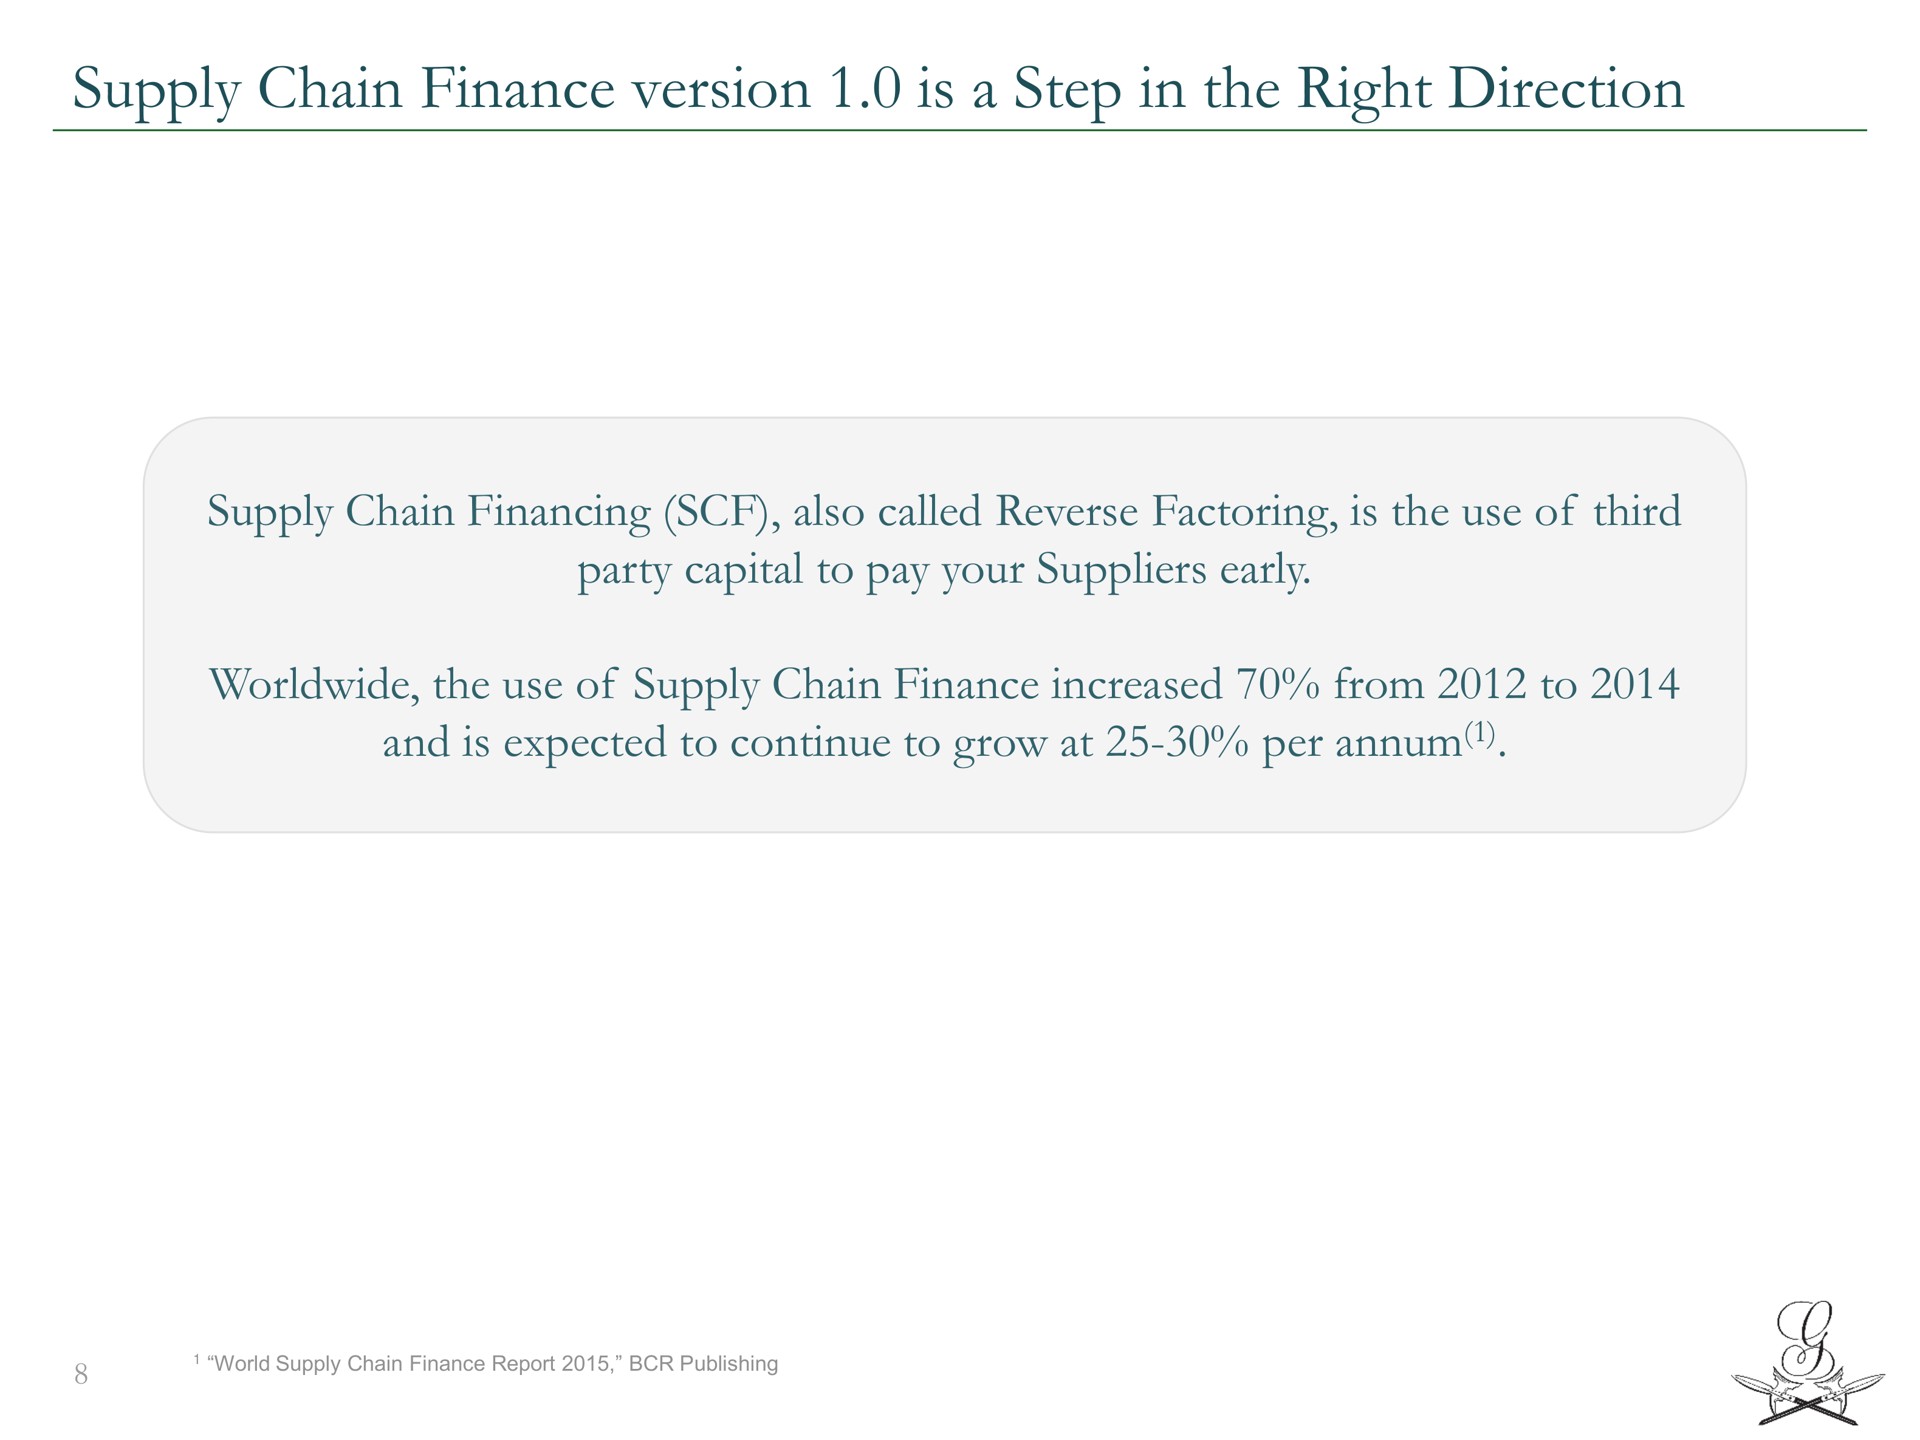 supply chain finance version is a step in the right direction supply chain financing also called reverse factoring is the use of third party capital to pay your suppliers early the use of supply chain finance increased from to and is expected to continue to grow at per | Greensill Capital